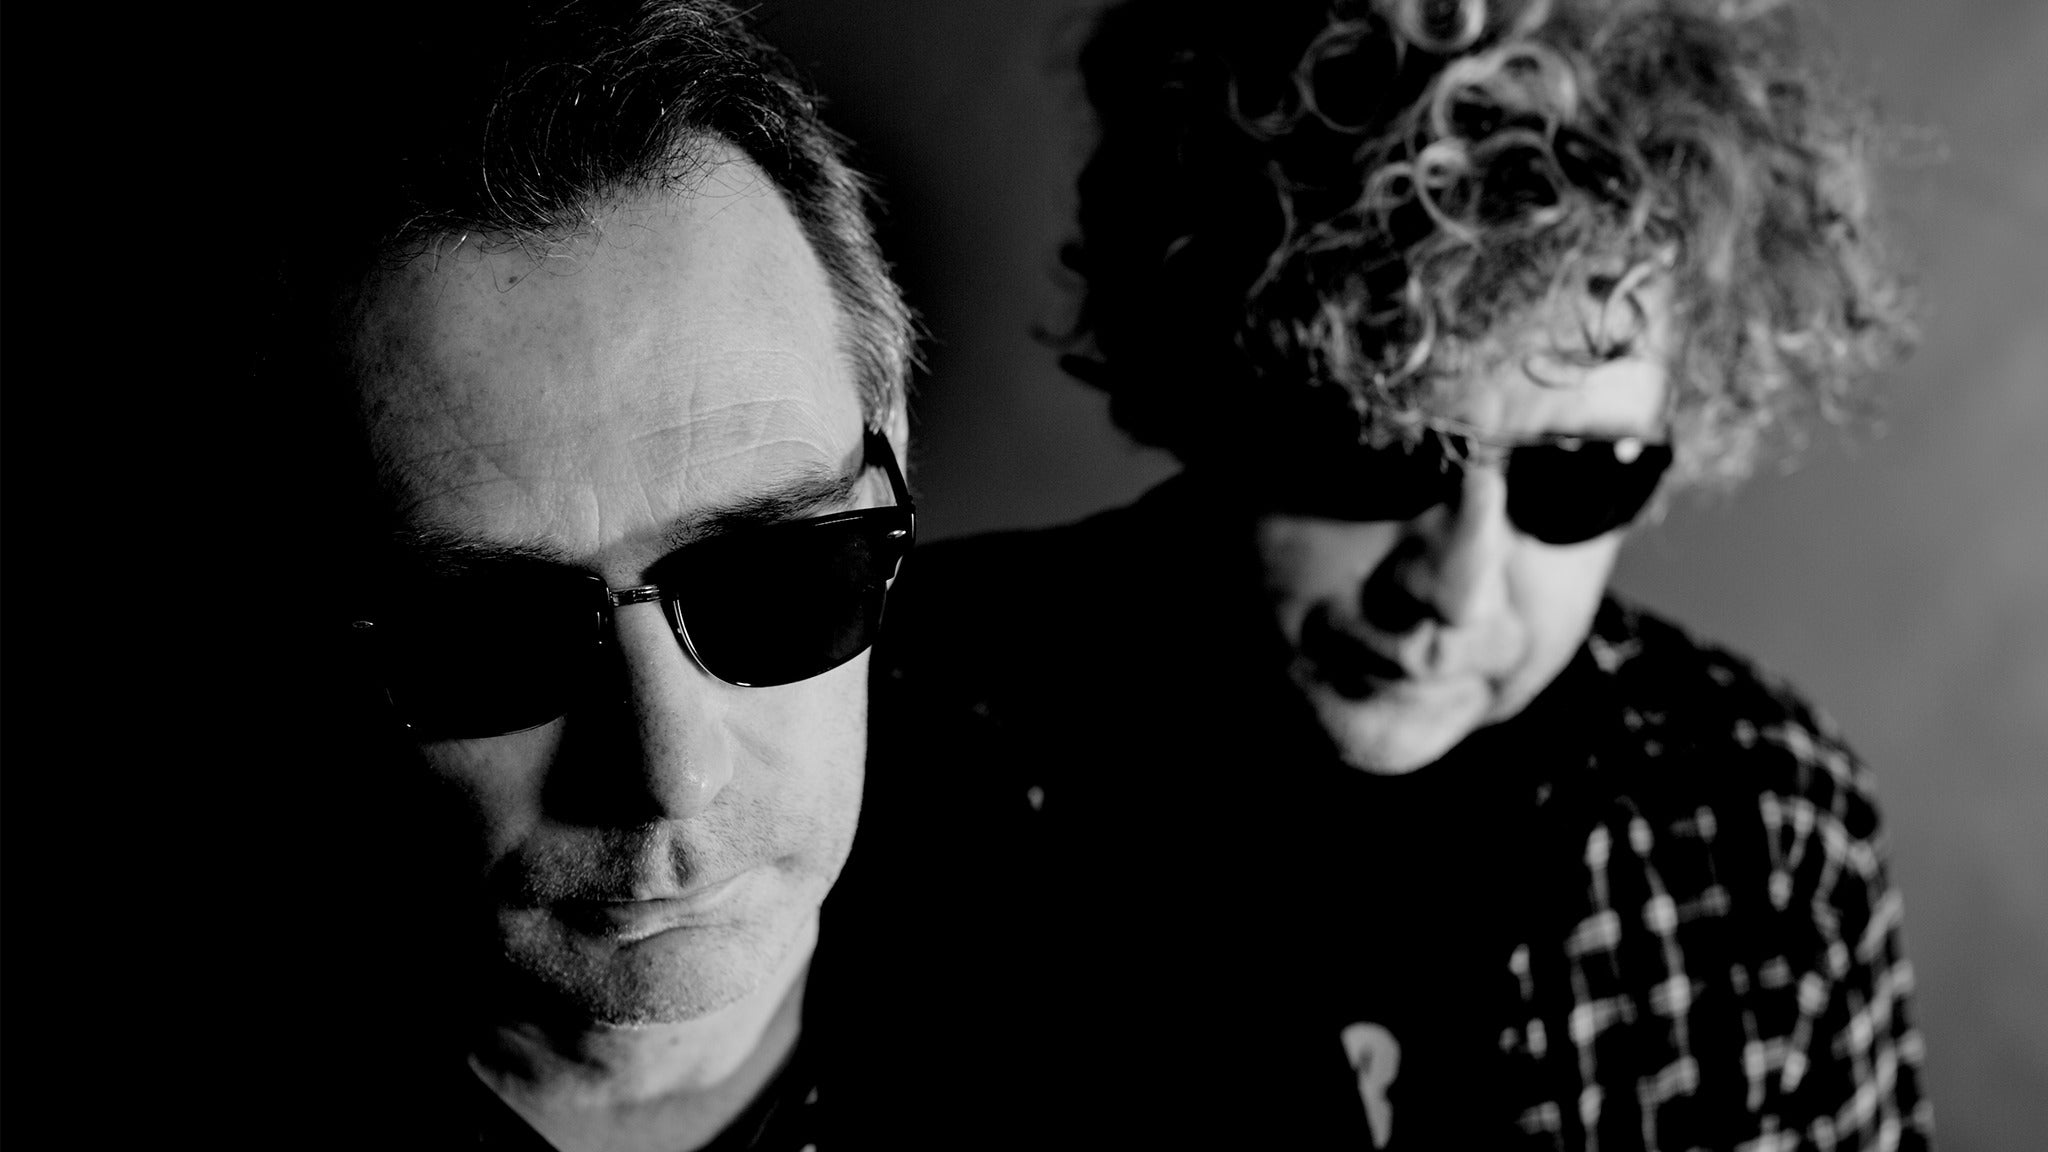 107.9 KBPI Presents The Jesus and Mary Chain presale code